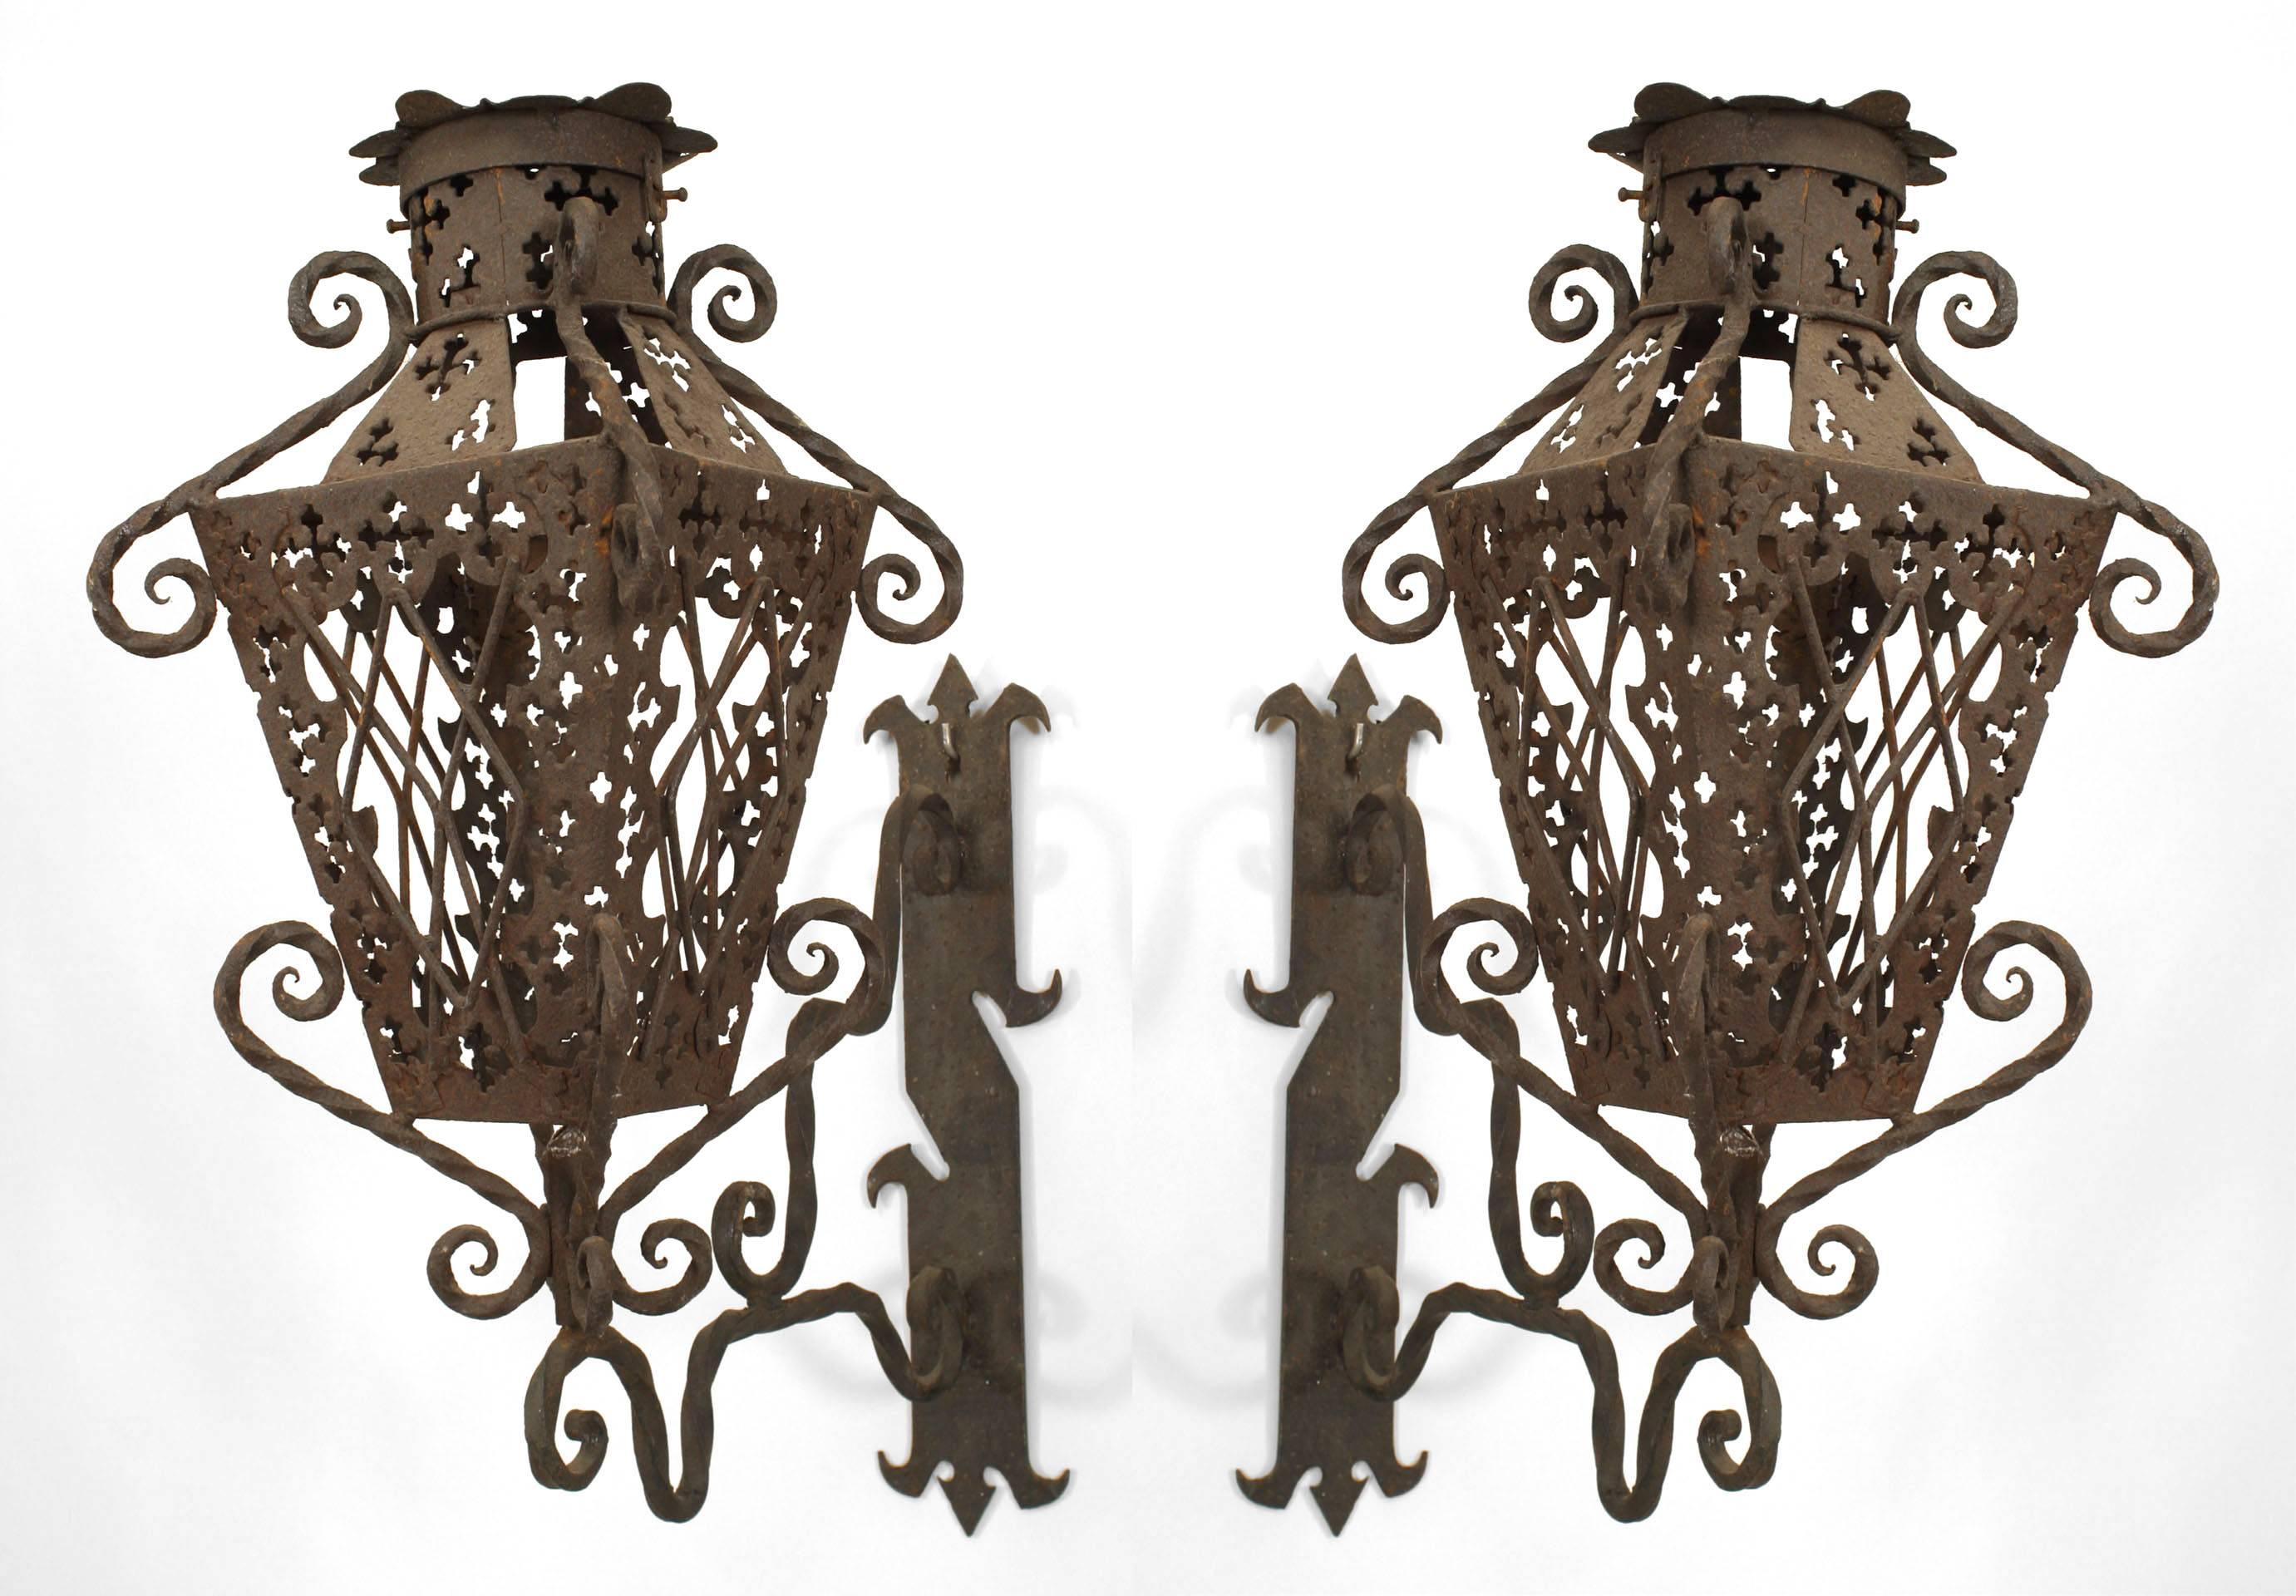 Pair of Italian Renaissance-style (19/20th Century) wrought iron exterior wall lanterns with 4 filigree panels supported by a scroll design wall mounted bracket (PRICED AS Pair).
